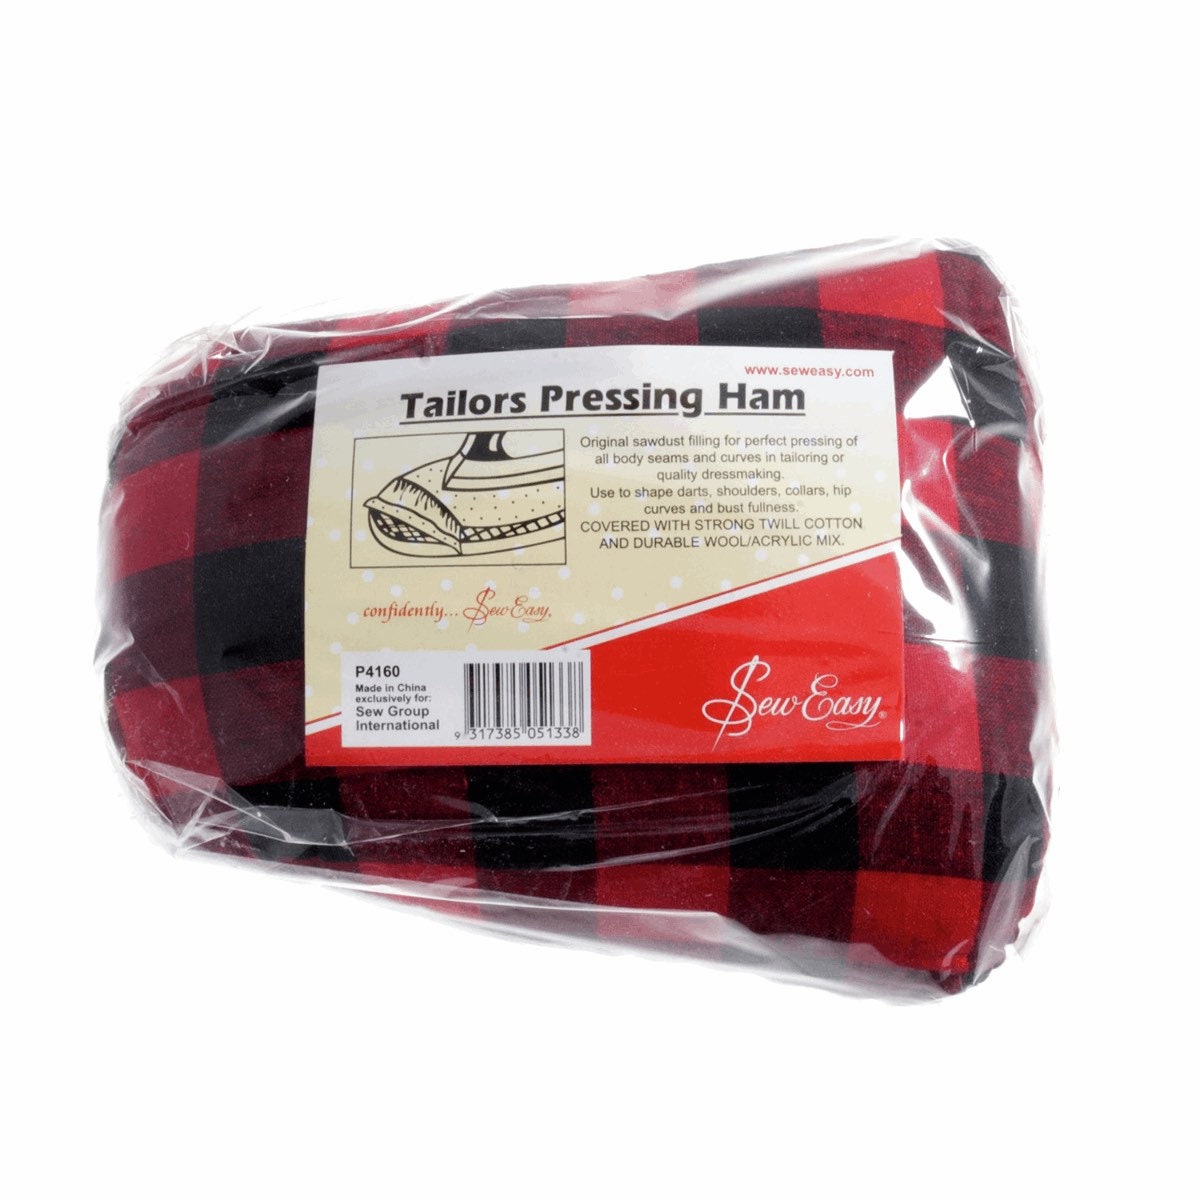 Tailors Pressing Ham Sew Easy H4160 Sawdust Filling for Perfect Pressing of  Body Seams Twill Cotton Wool/acrylic Mix Cover Red Black Check 